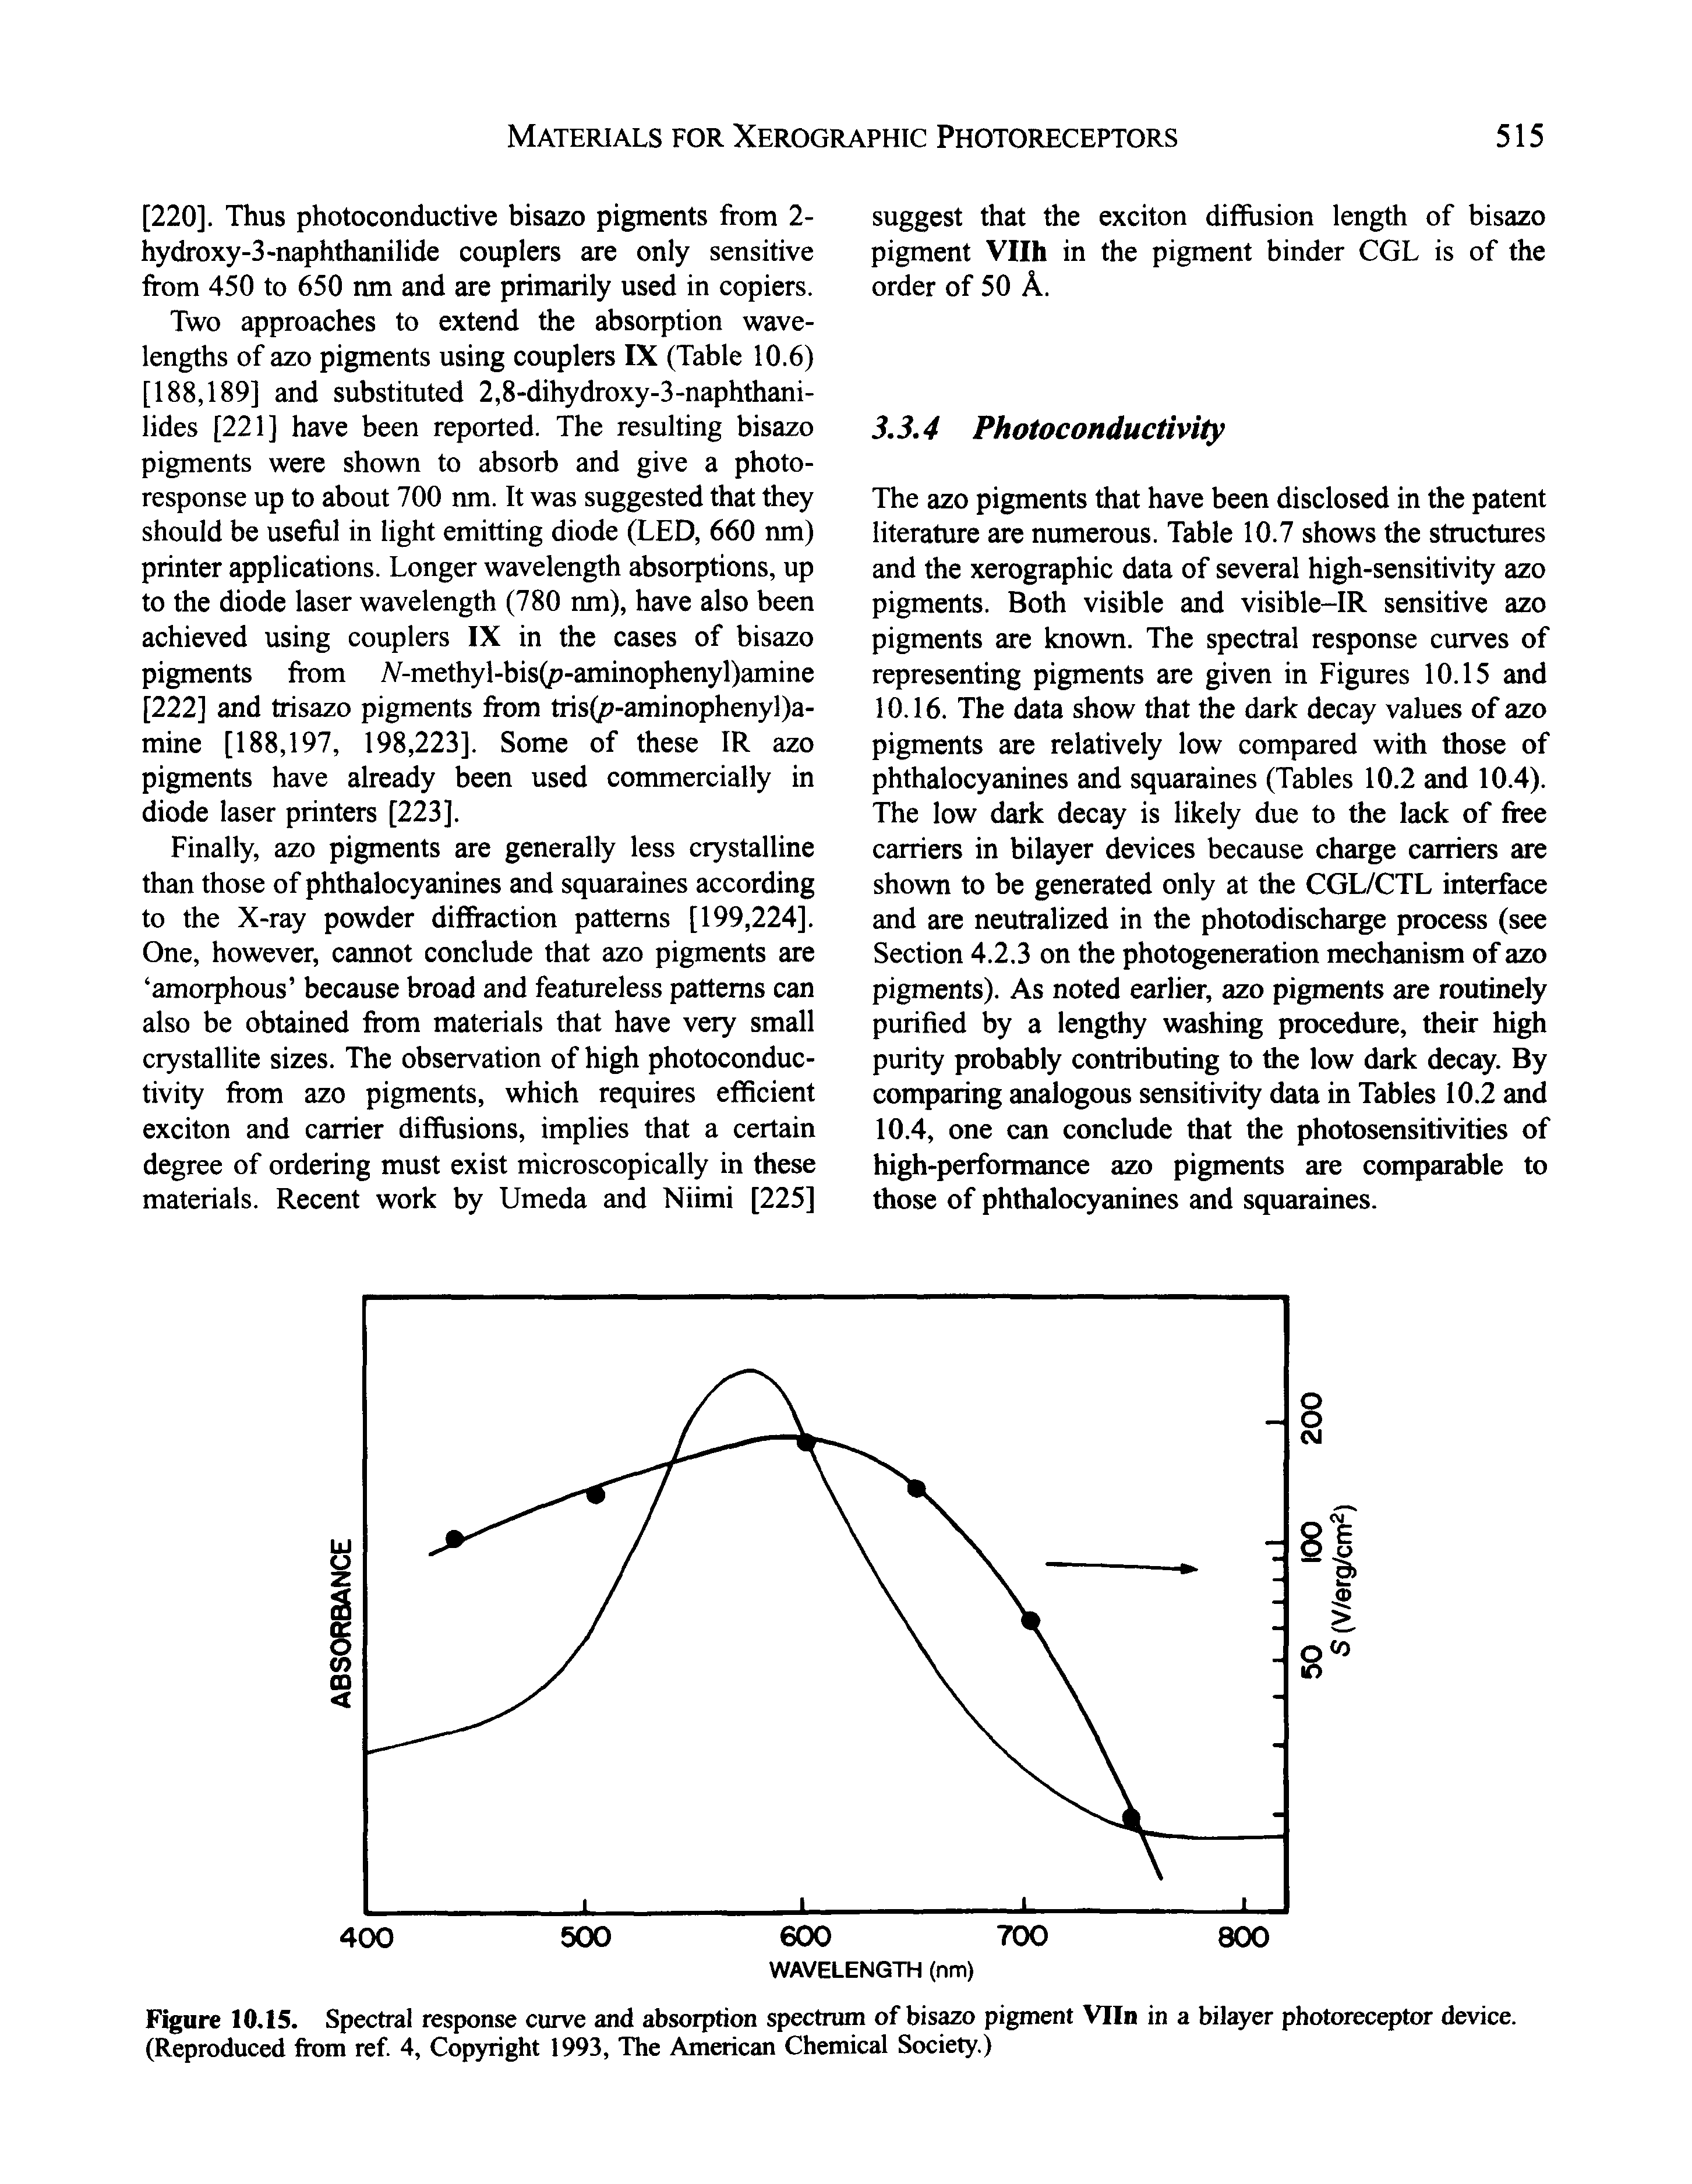 Figure 10.15. Spectral response curve and absorption spectrum of bisazo pigment Vlln in a bilayer photoreceptor device. (Reproduced from ref 4, Copyright 1993, The American Chemical Society.)...